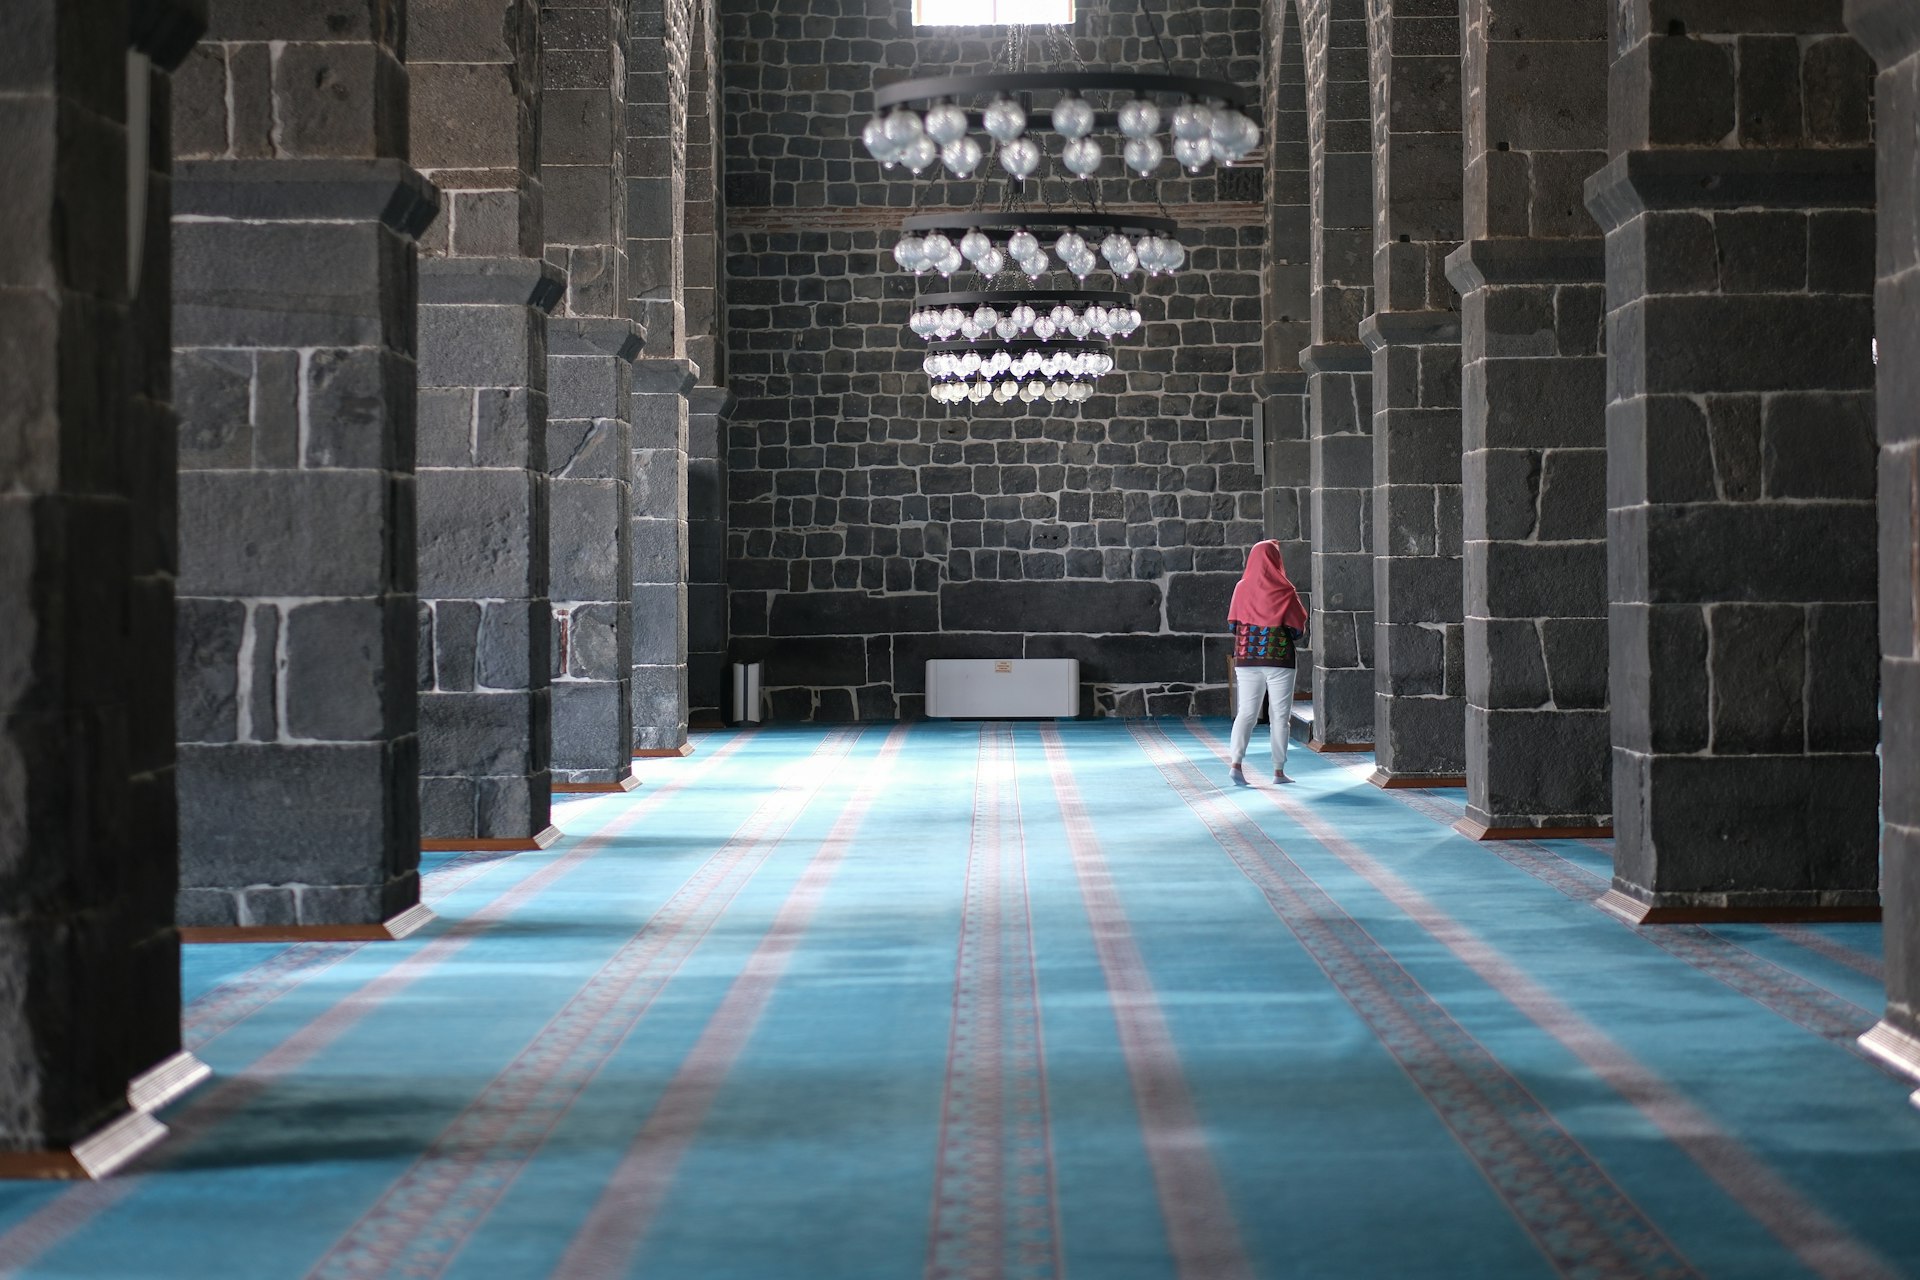 Woman explores the interior of Diyarbakır's Great Mosque, Turkey